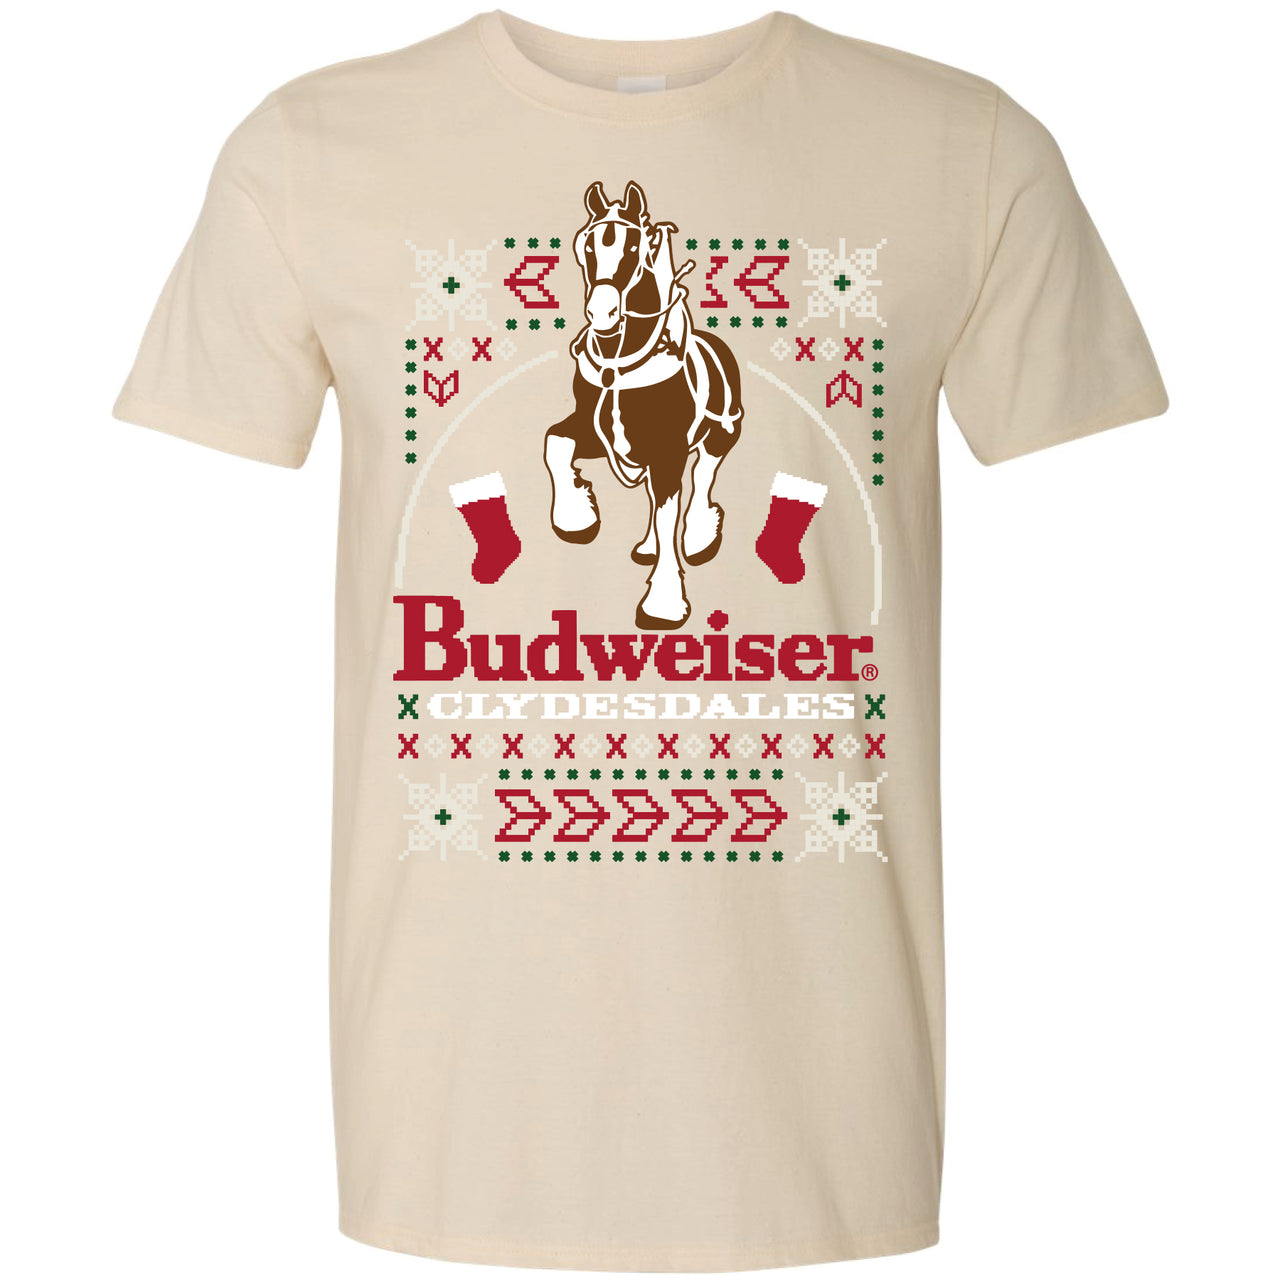 Budweiser Clydesdales - Large Clydesdale Ugly Sweater T-Shirt